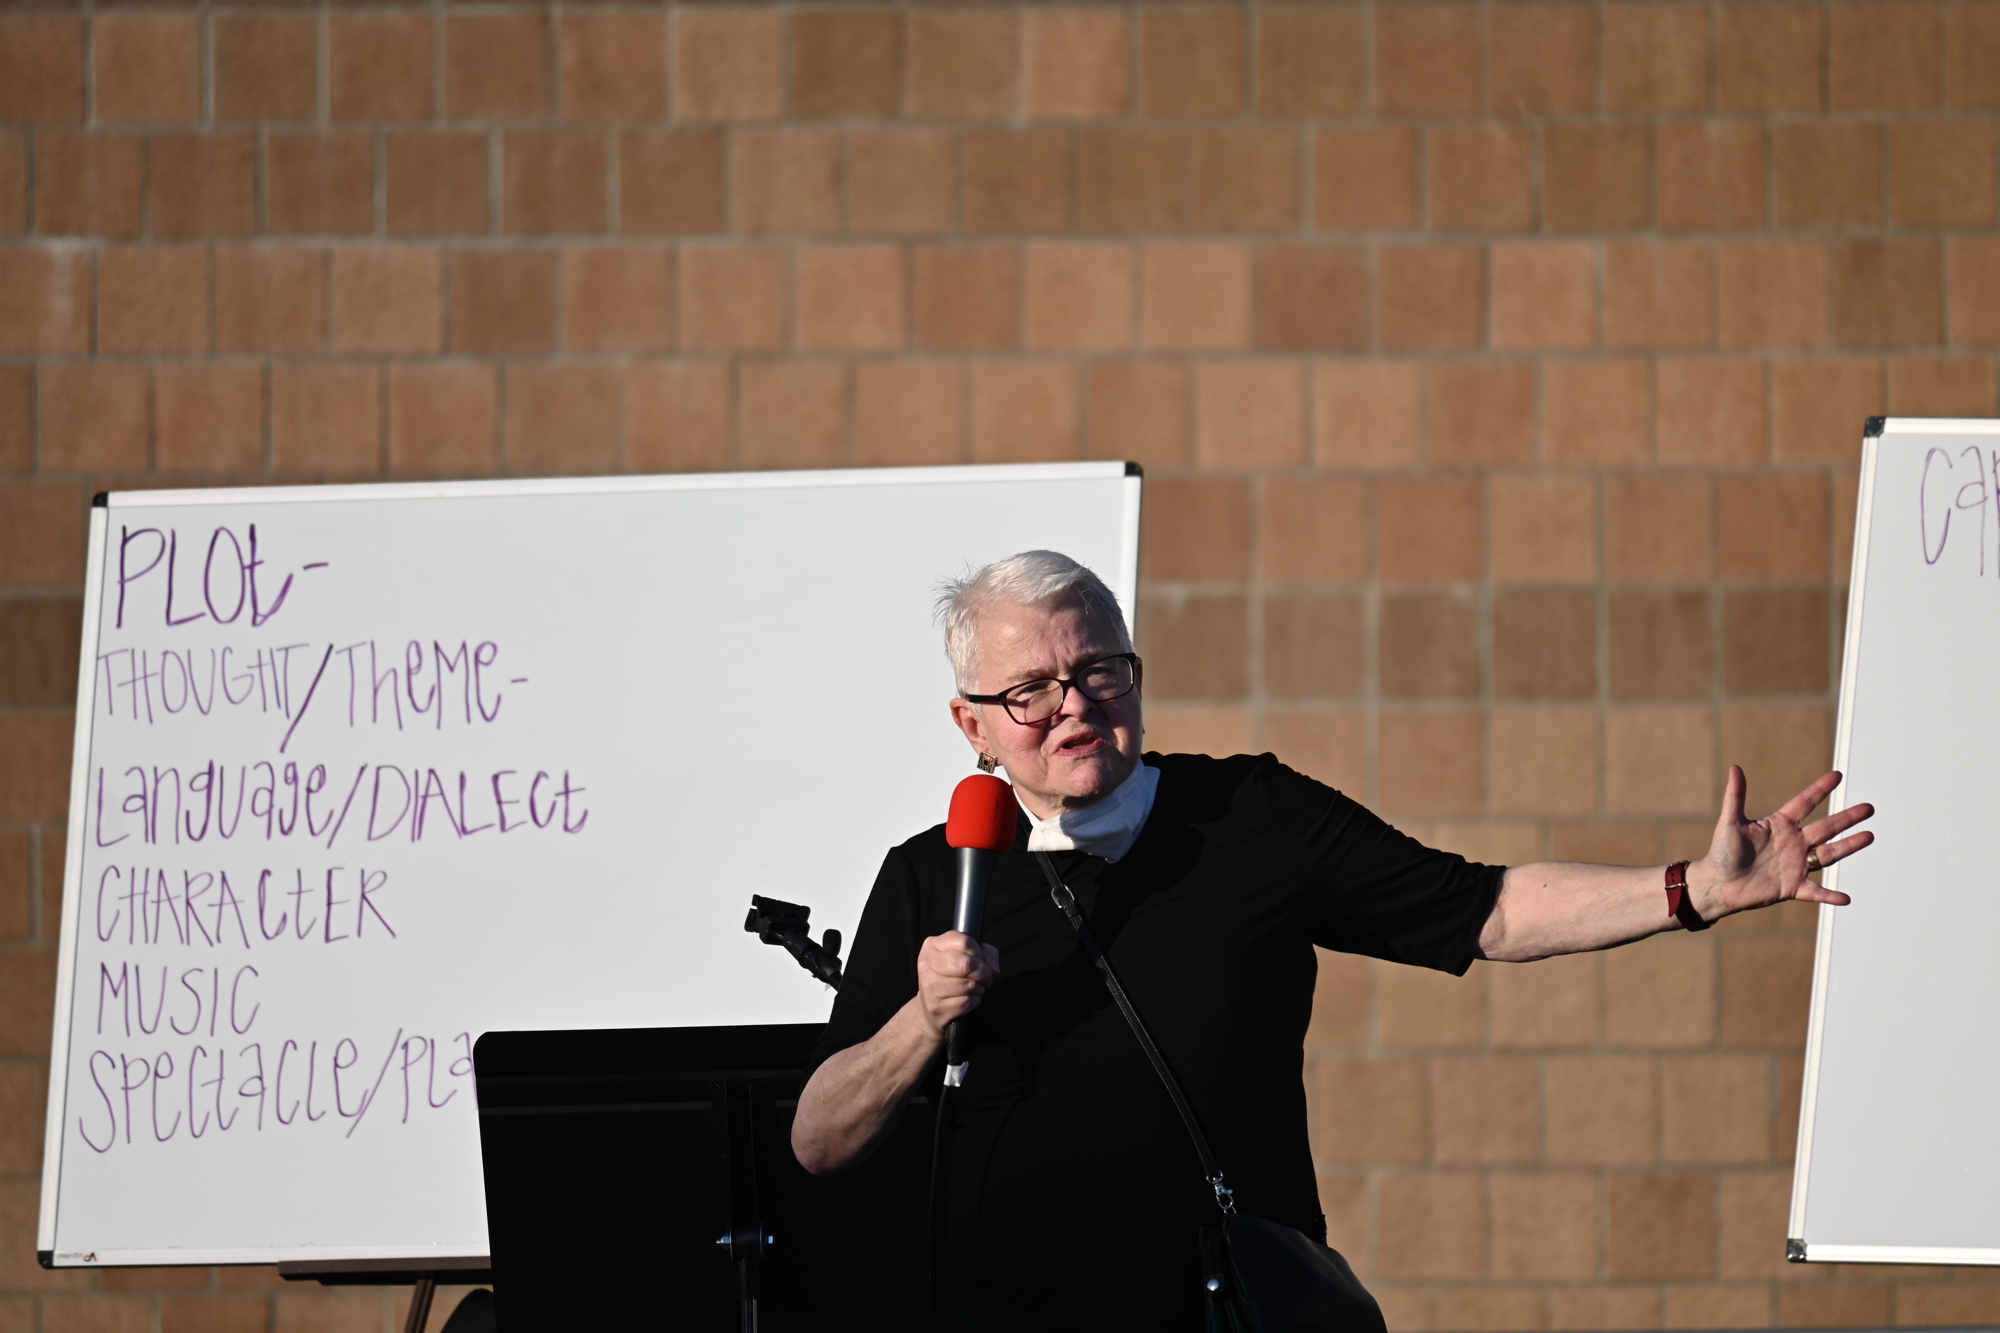 Paula Vogel, who has taught at Yale and Brown University, spoke for about an hour to the crowd at Booker High School. (Photo: Spencer Fordin)